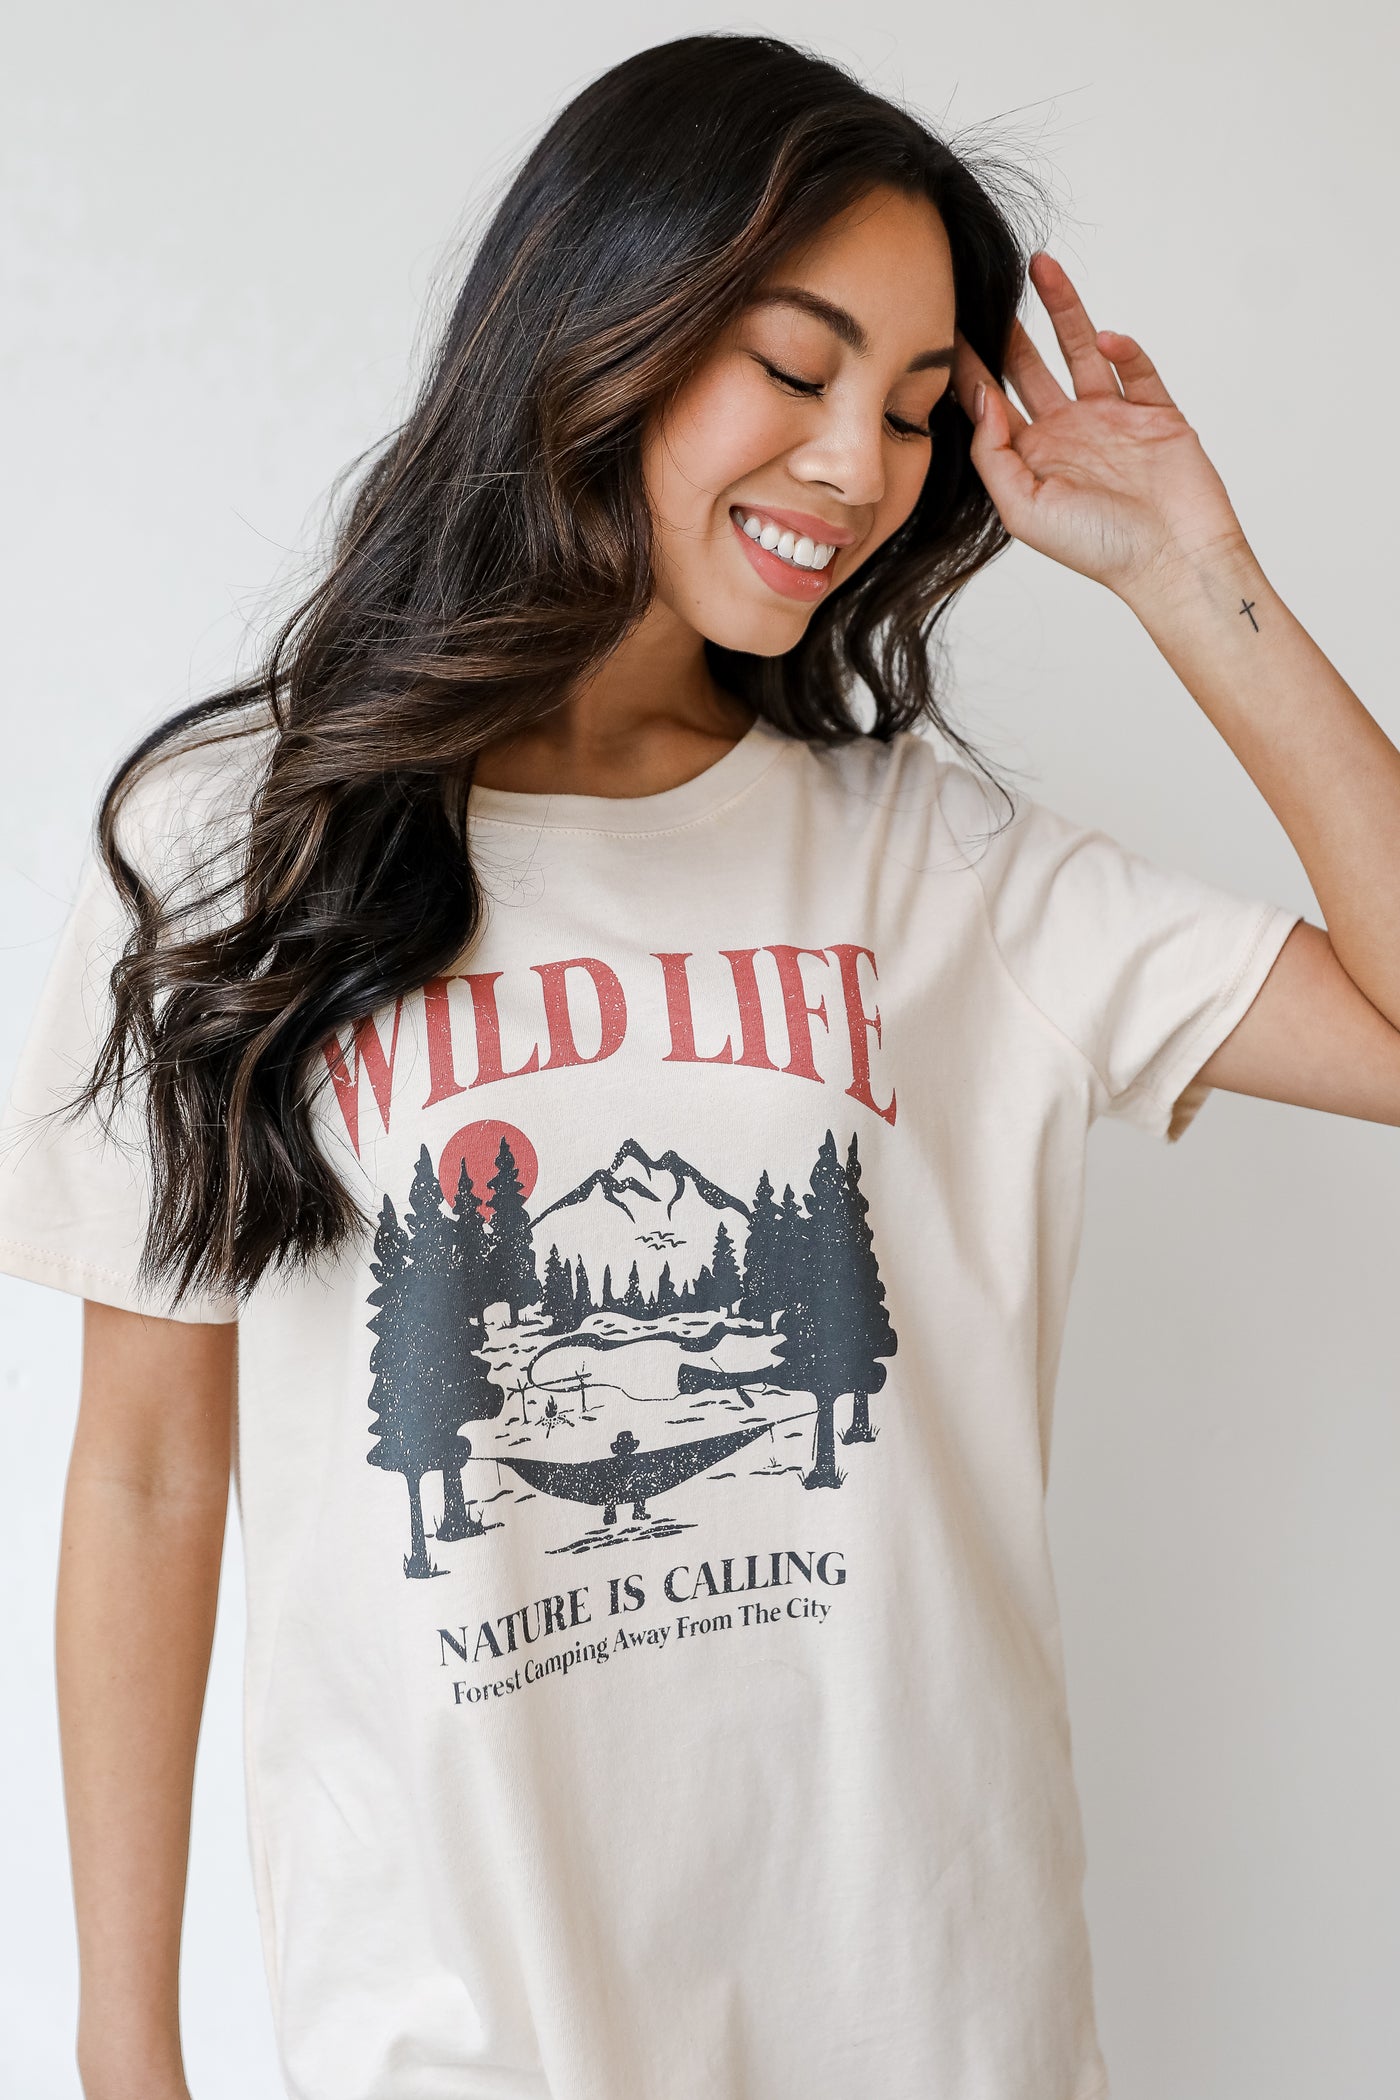 Wildlife Oversized Graphic Tee from dress up